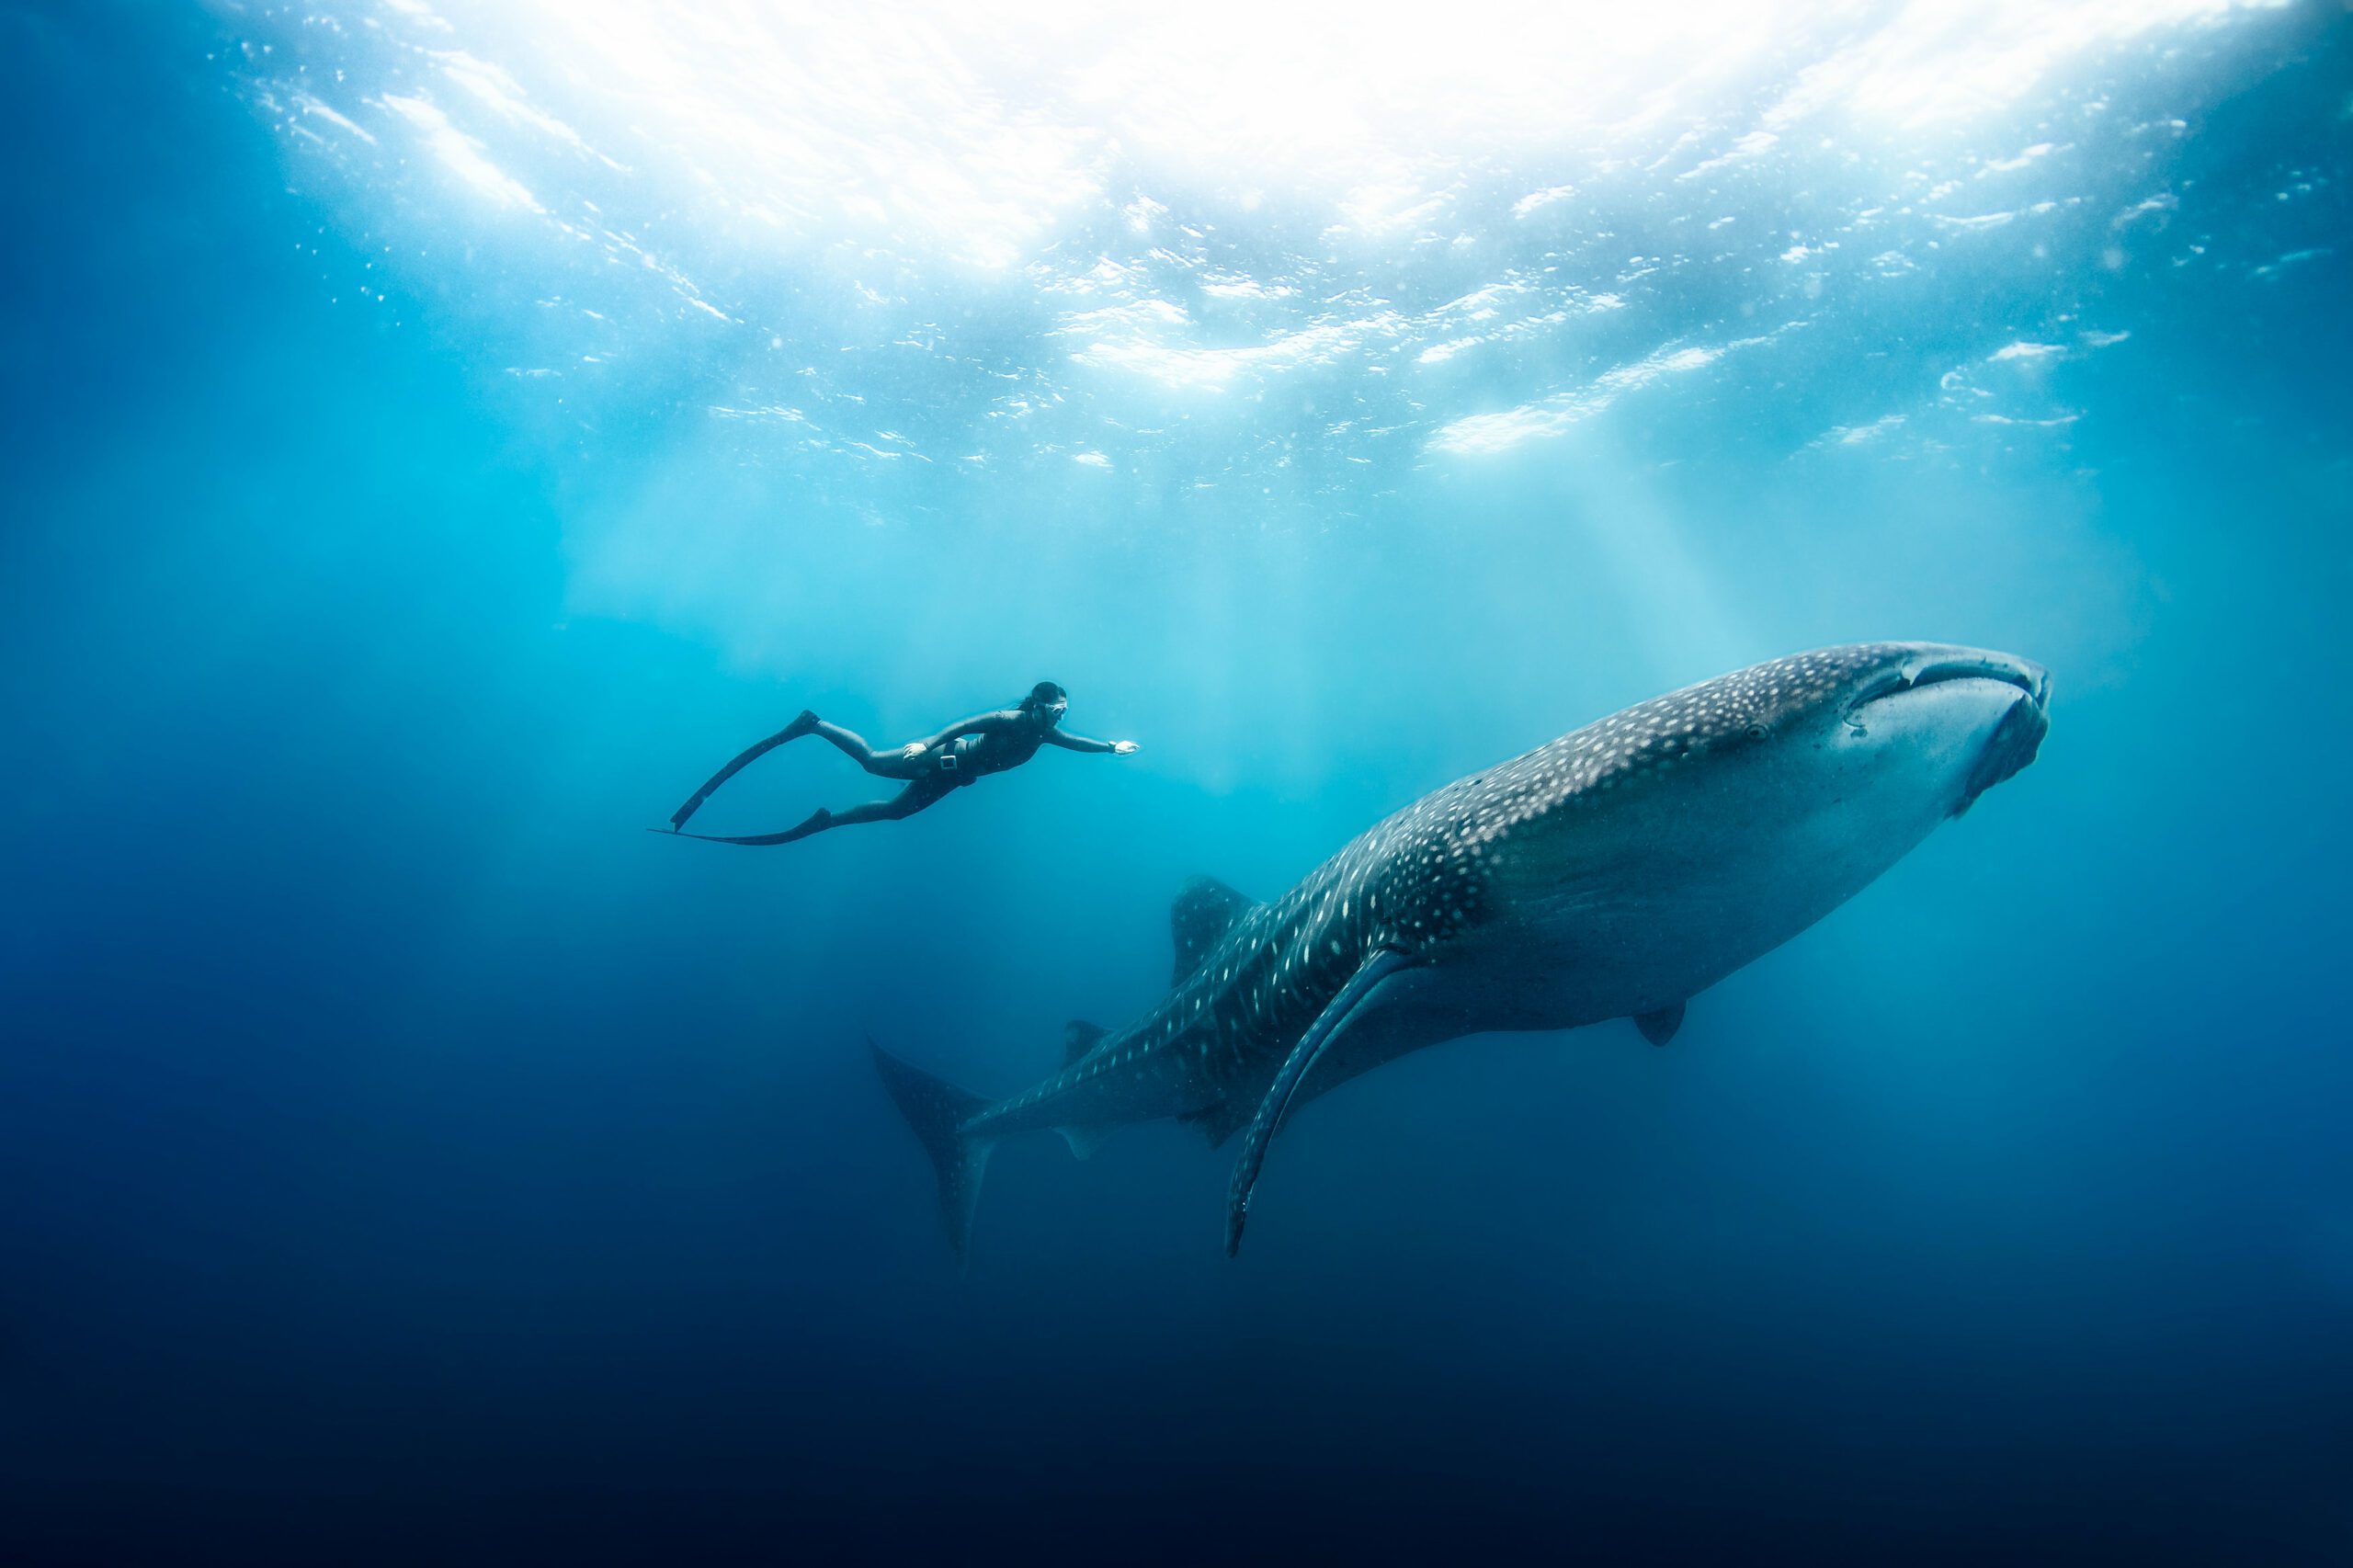 Freediving Q&A With I AM WATER Foundation's Hanli Prinsloo